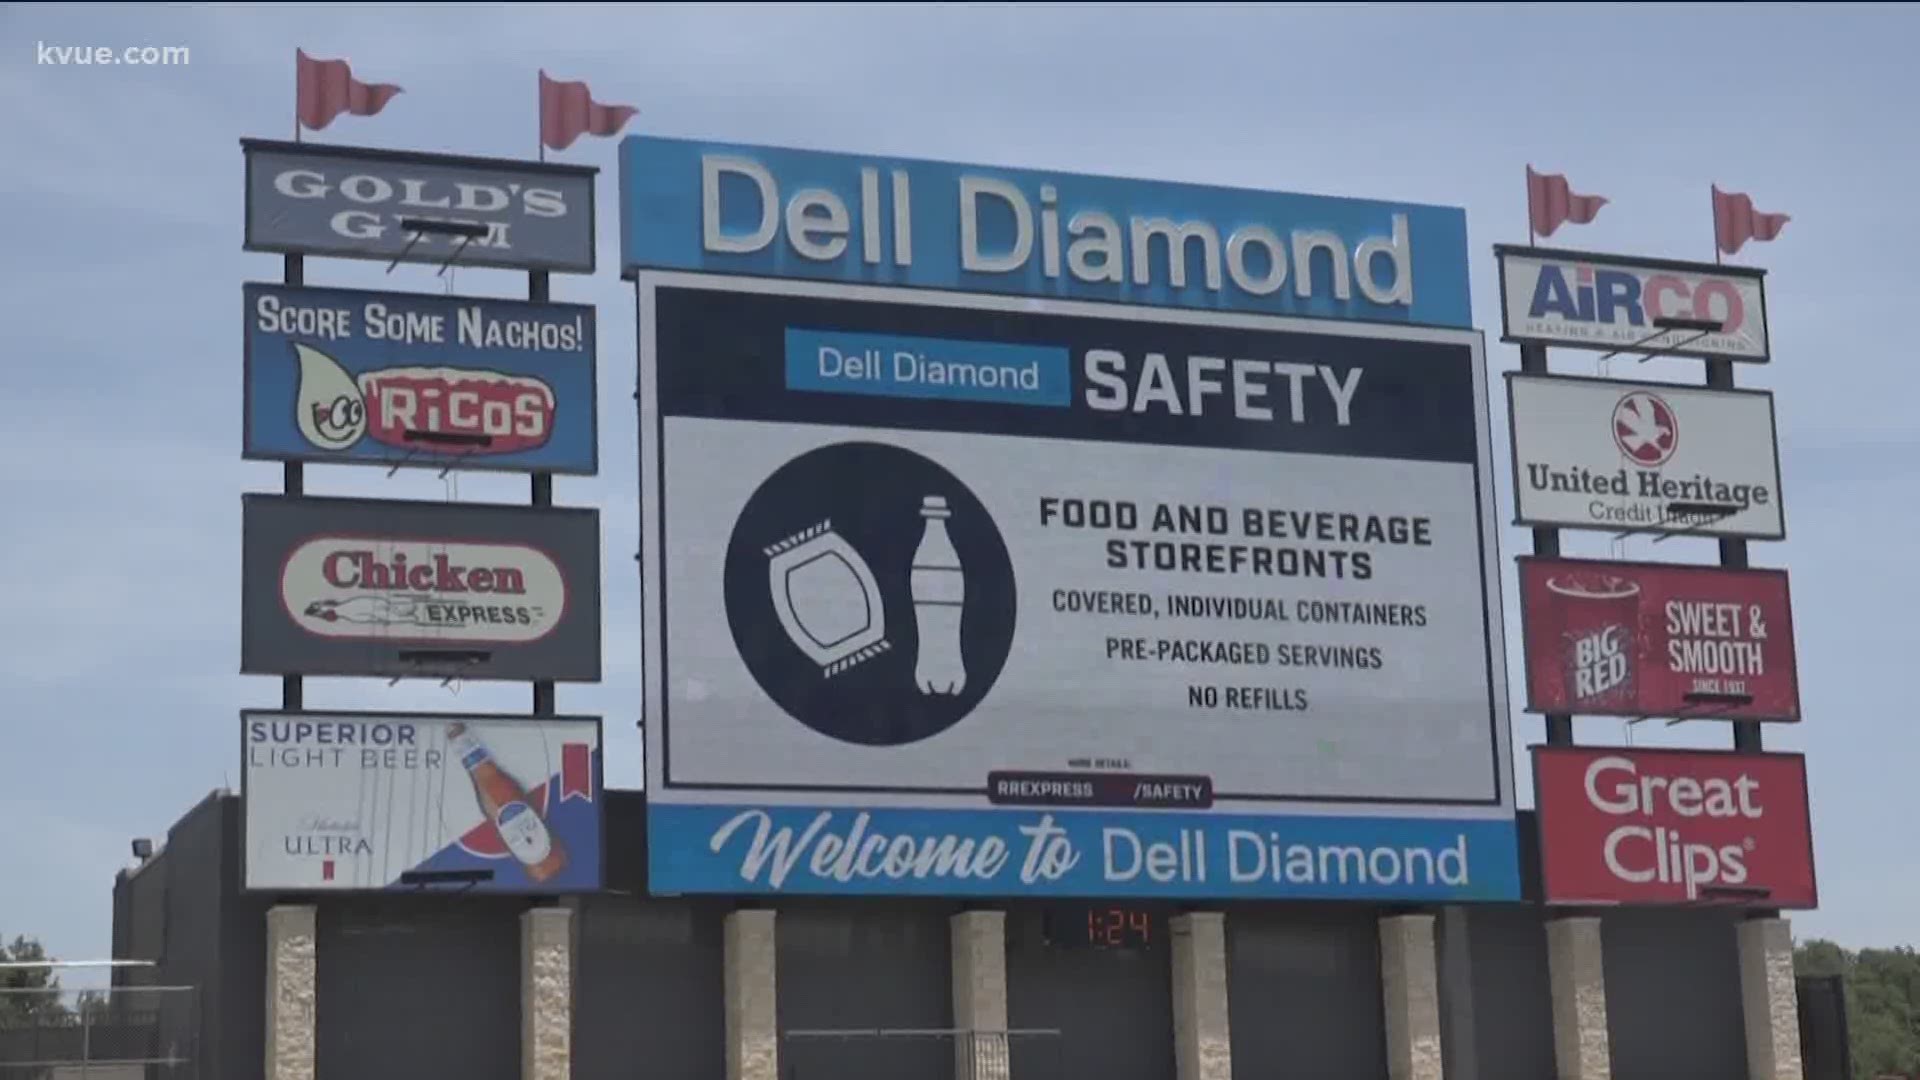 If you'r heading out to the Dell Diamond Stadium for a fireworks show, it's going to be a very different experience compared to previous years.